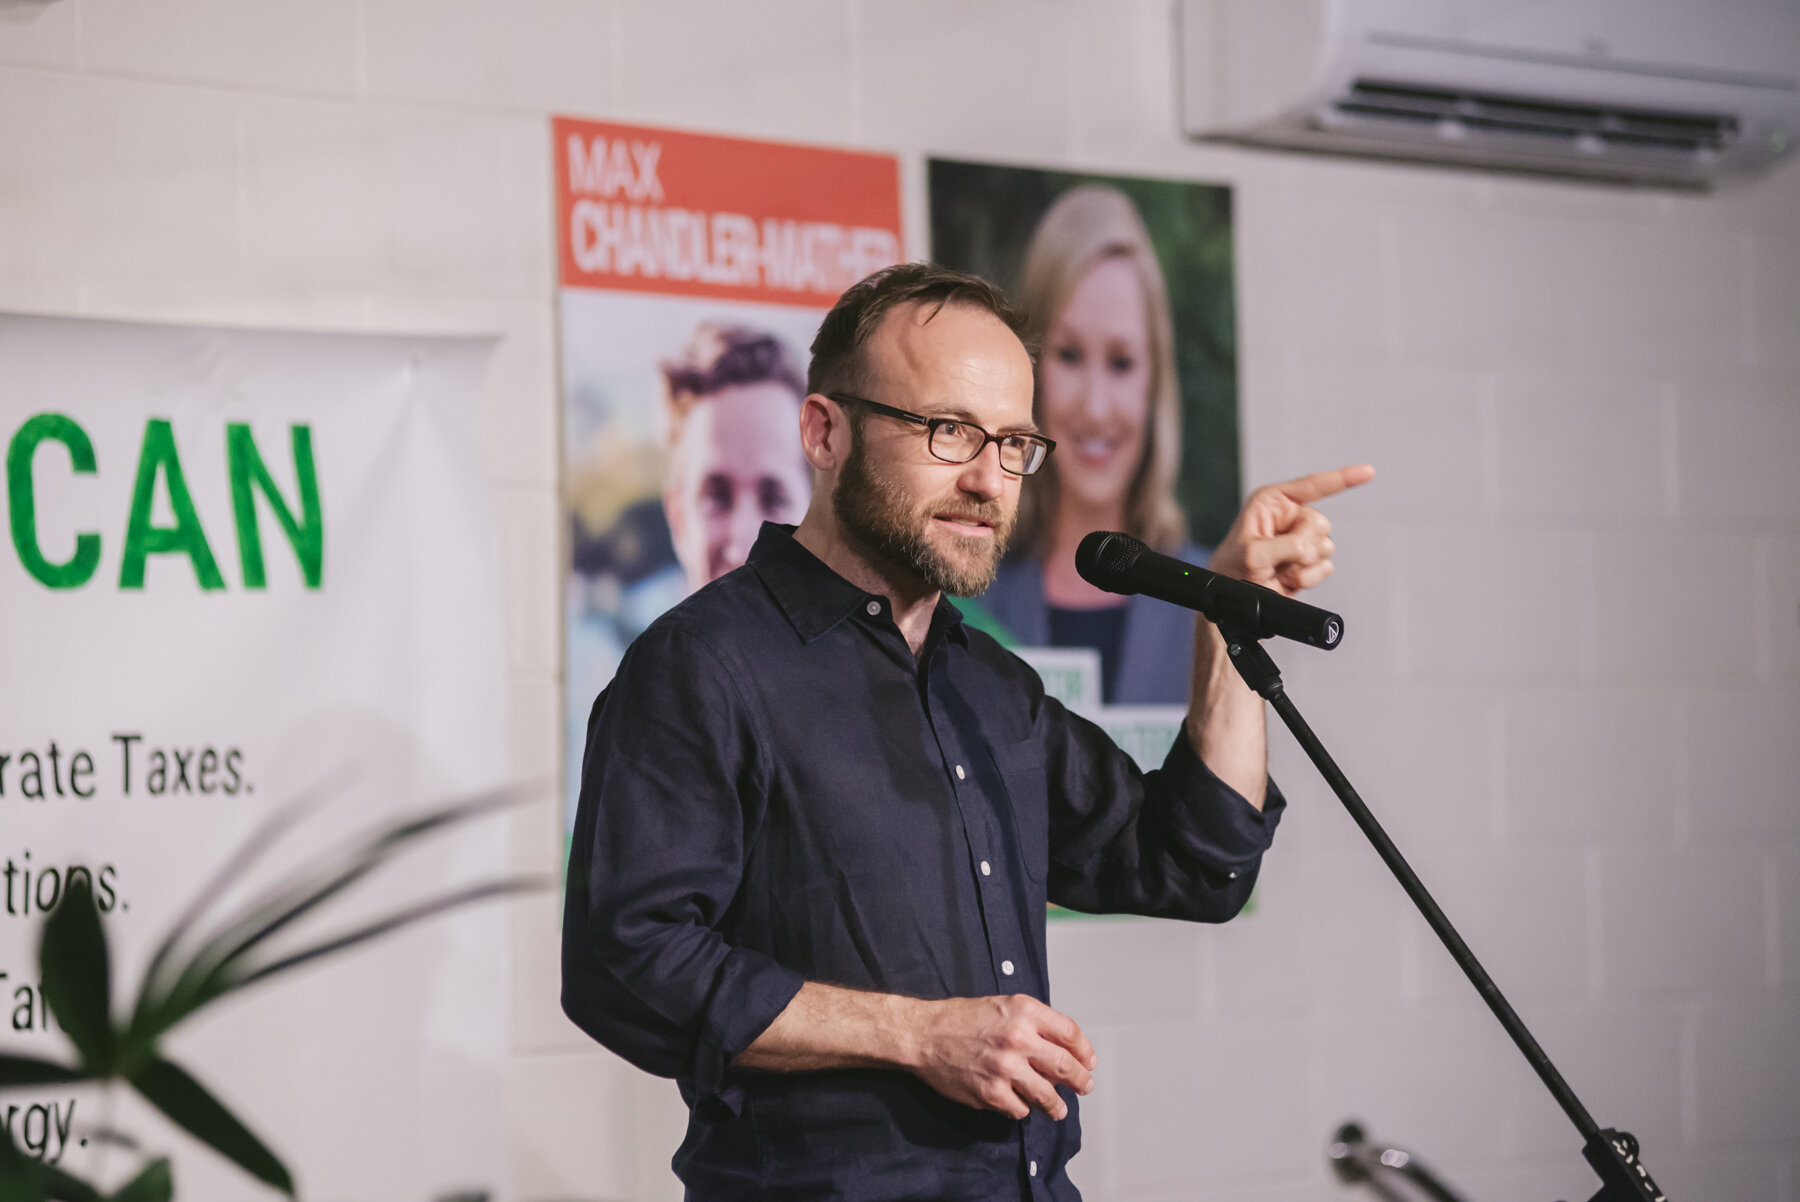 Greens leader and federal MP Adam Bandt speaks at the Greens for Griffith campaign launch